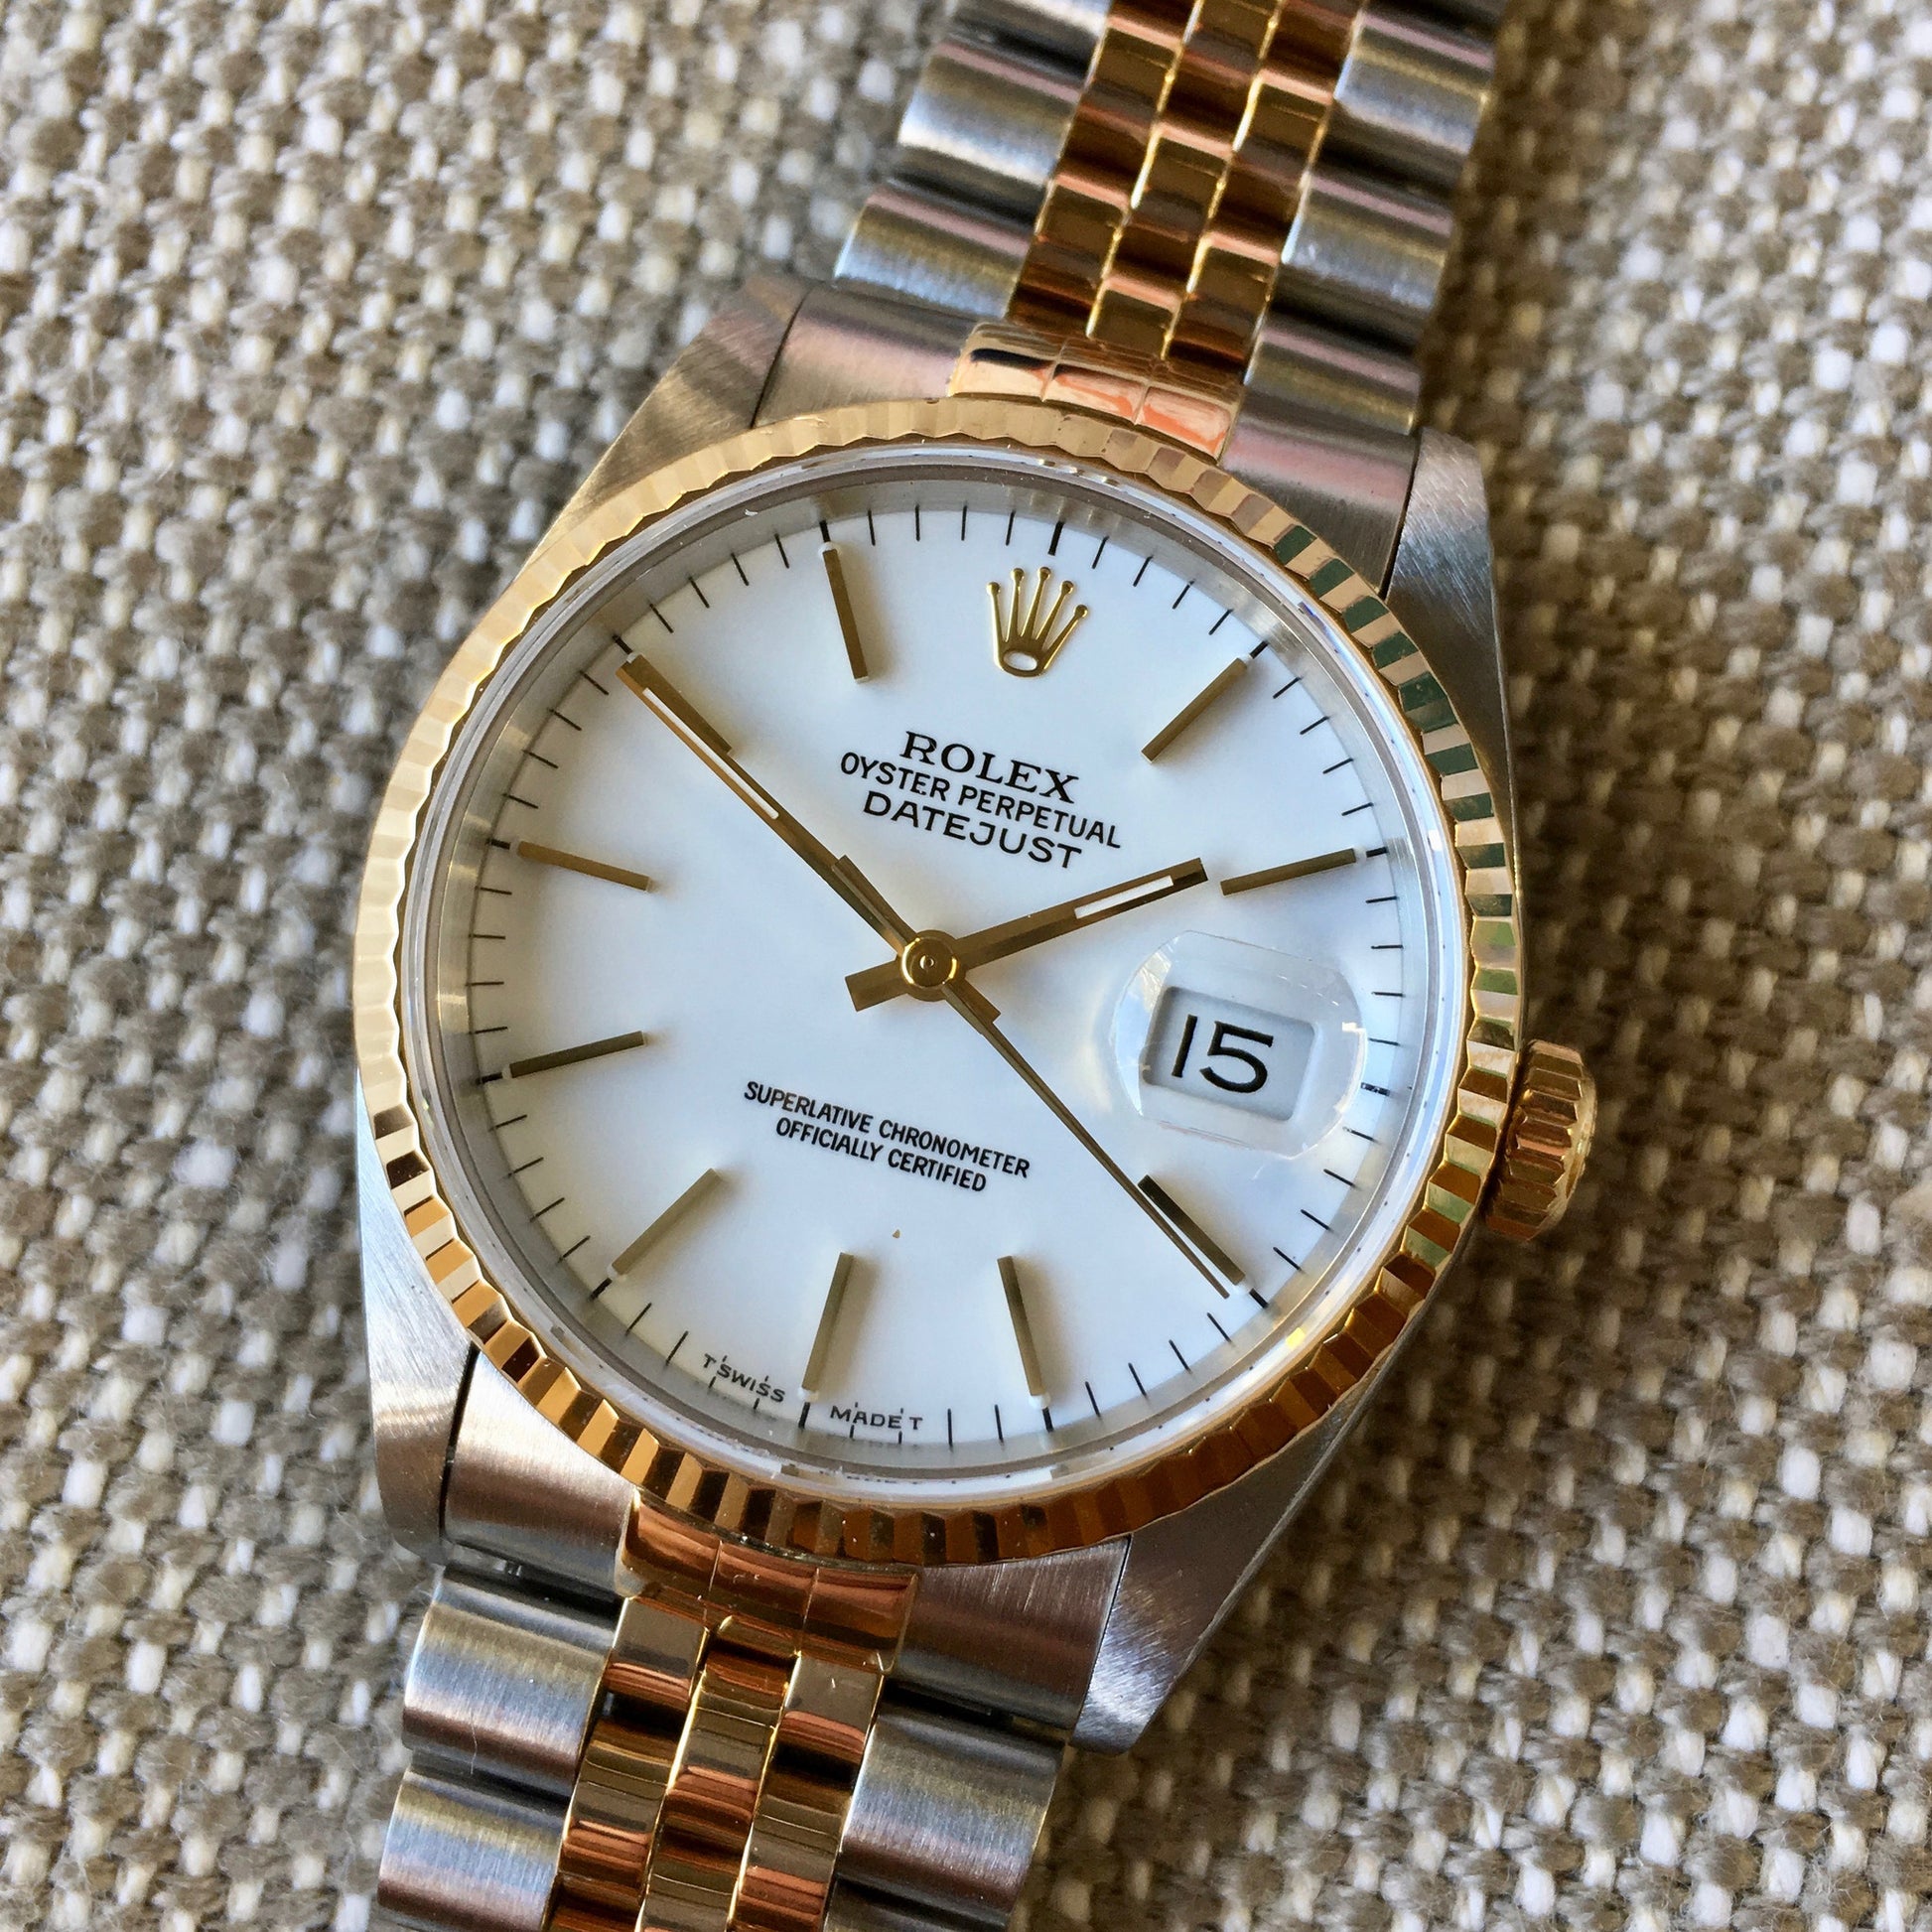 Rolex Datejust 16233 White Stick Two Tone Cal. 3135 "S" 1993 Serial Watch - Hashtag Watch Company